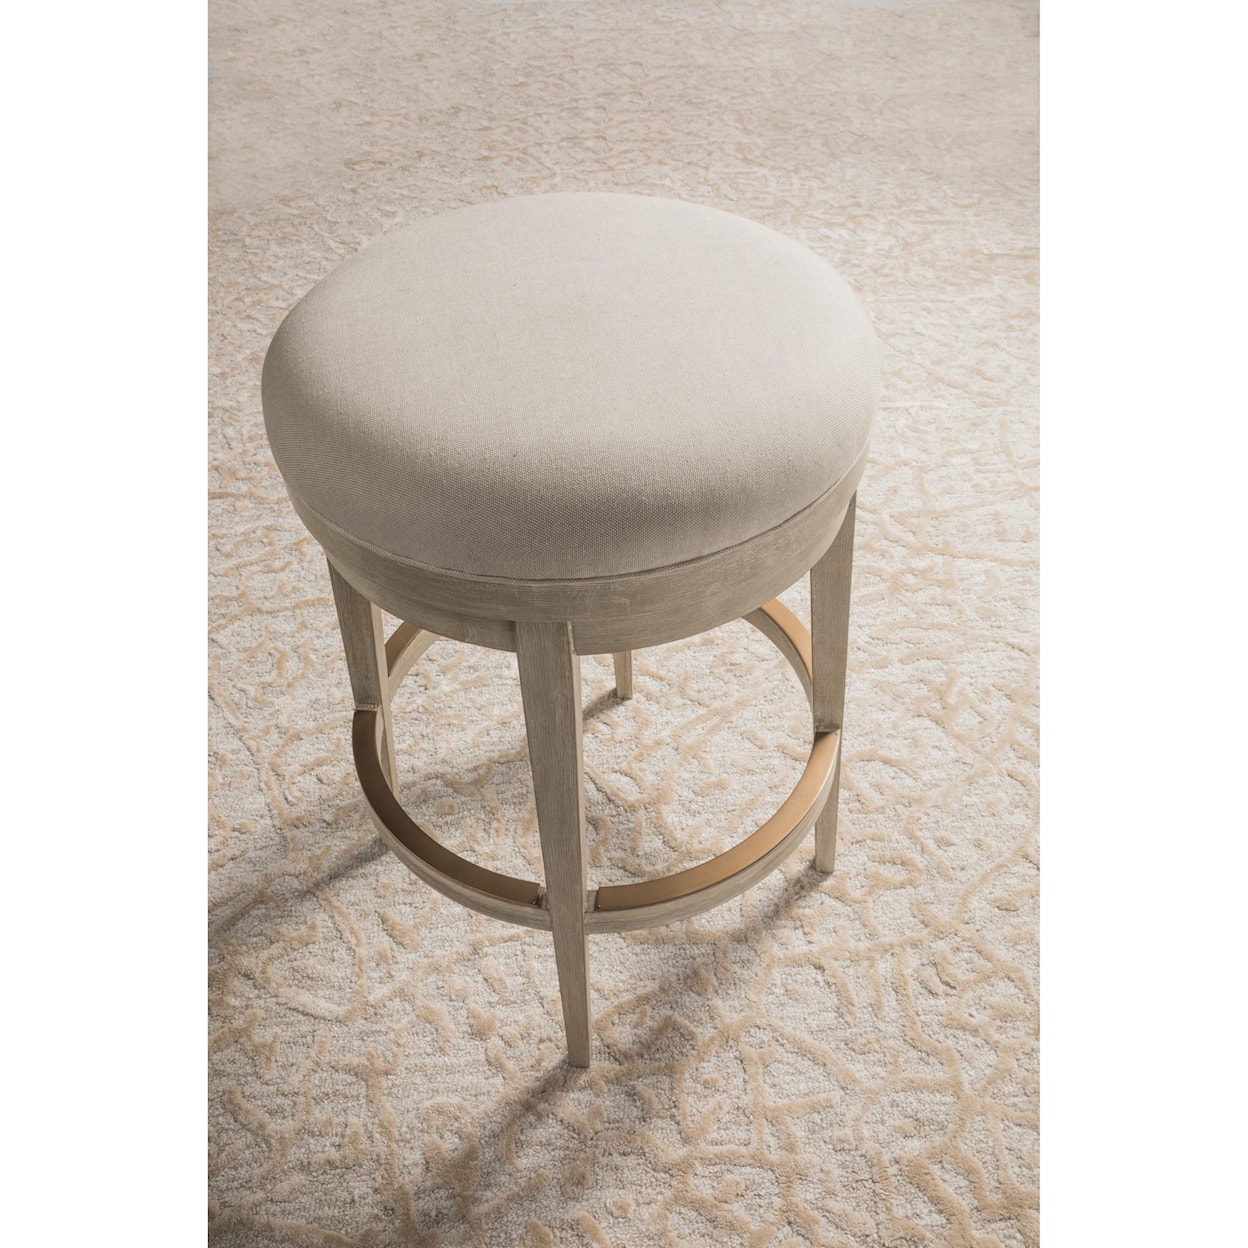 Artistica Cohesion Cecile Backless Swivel Barstool